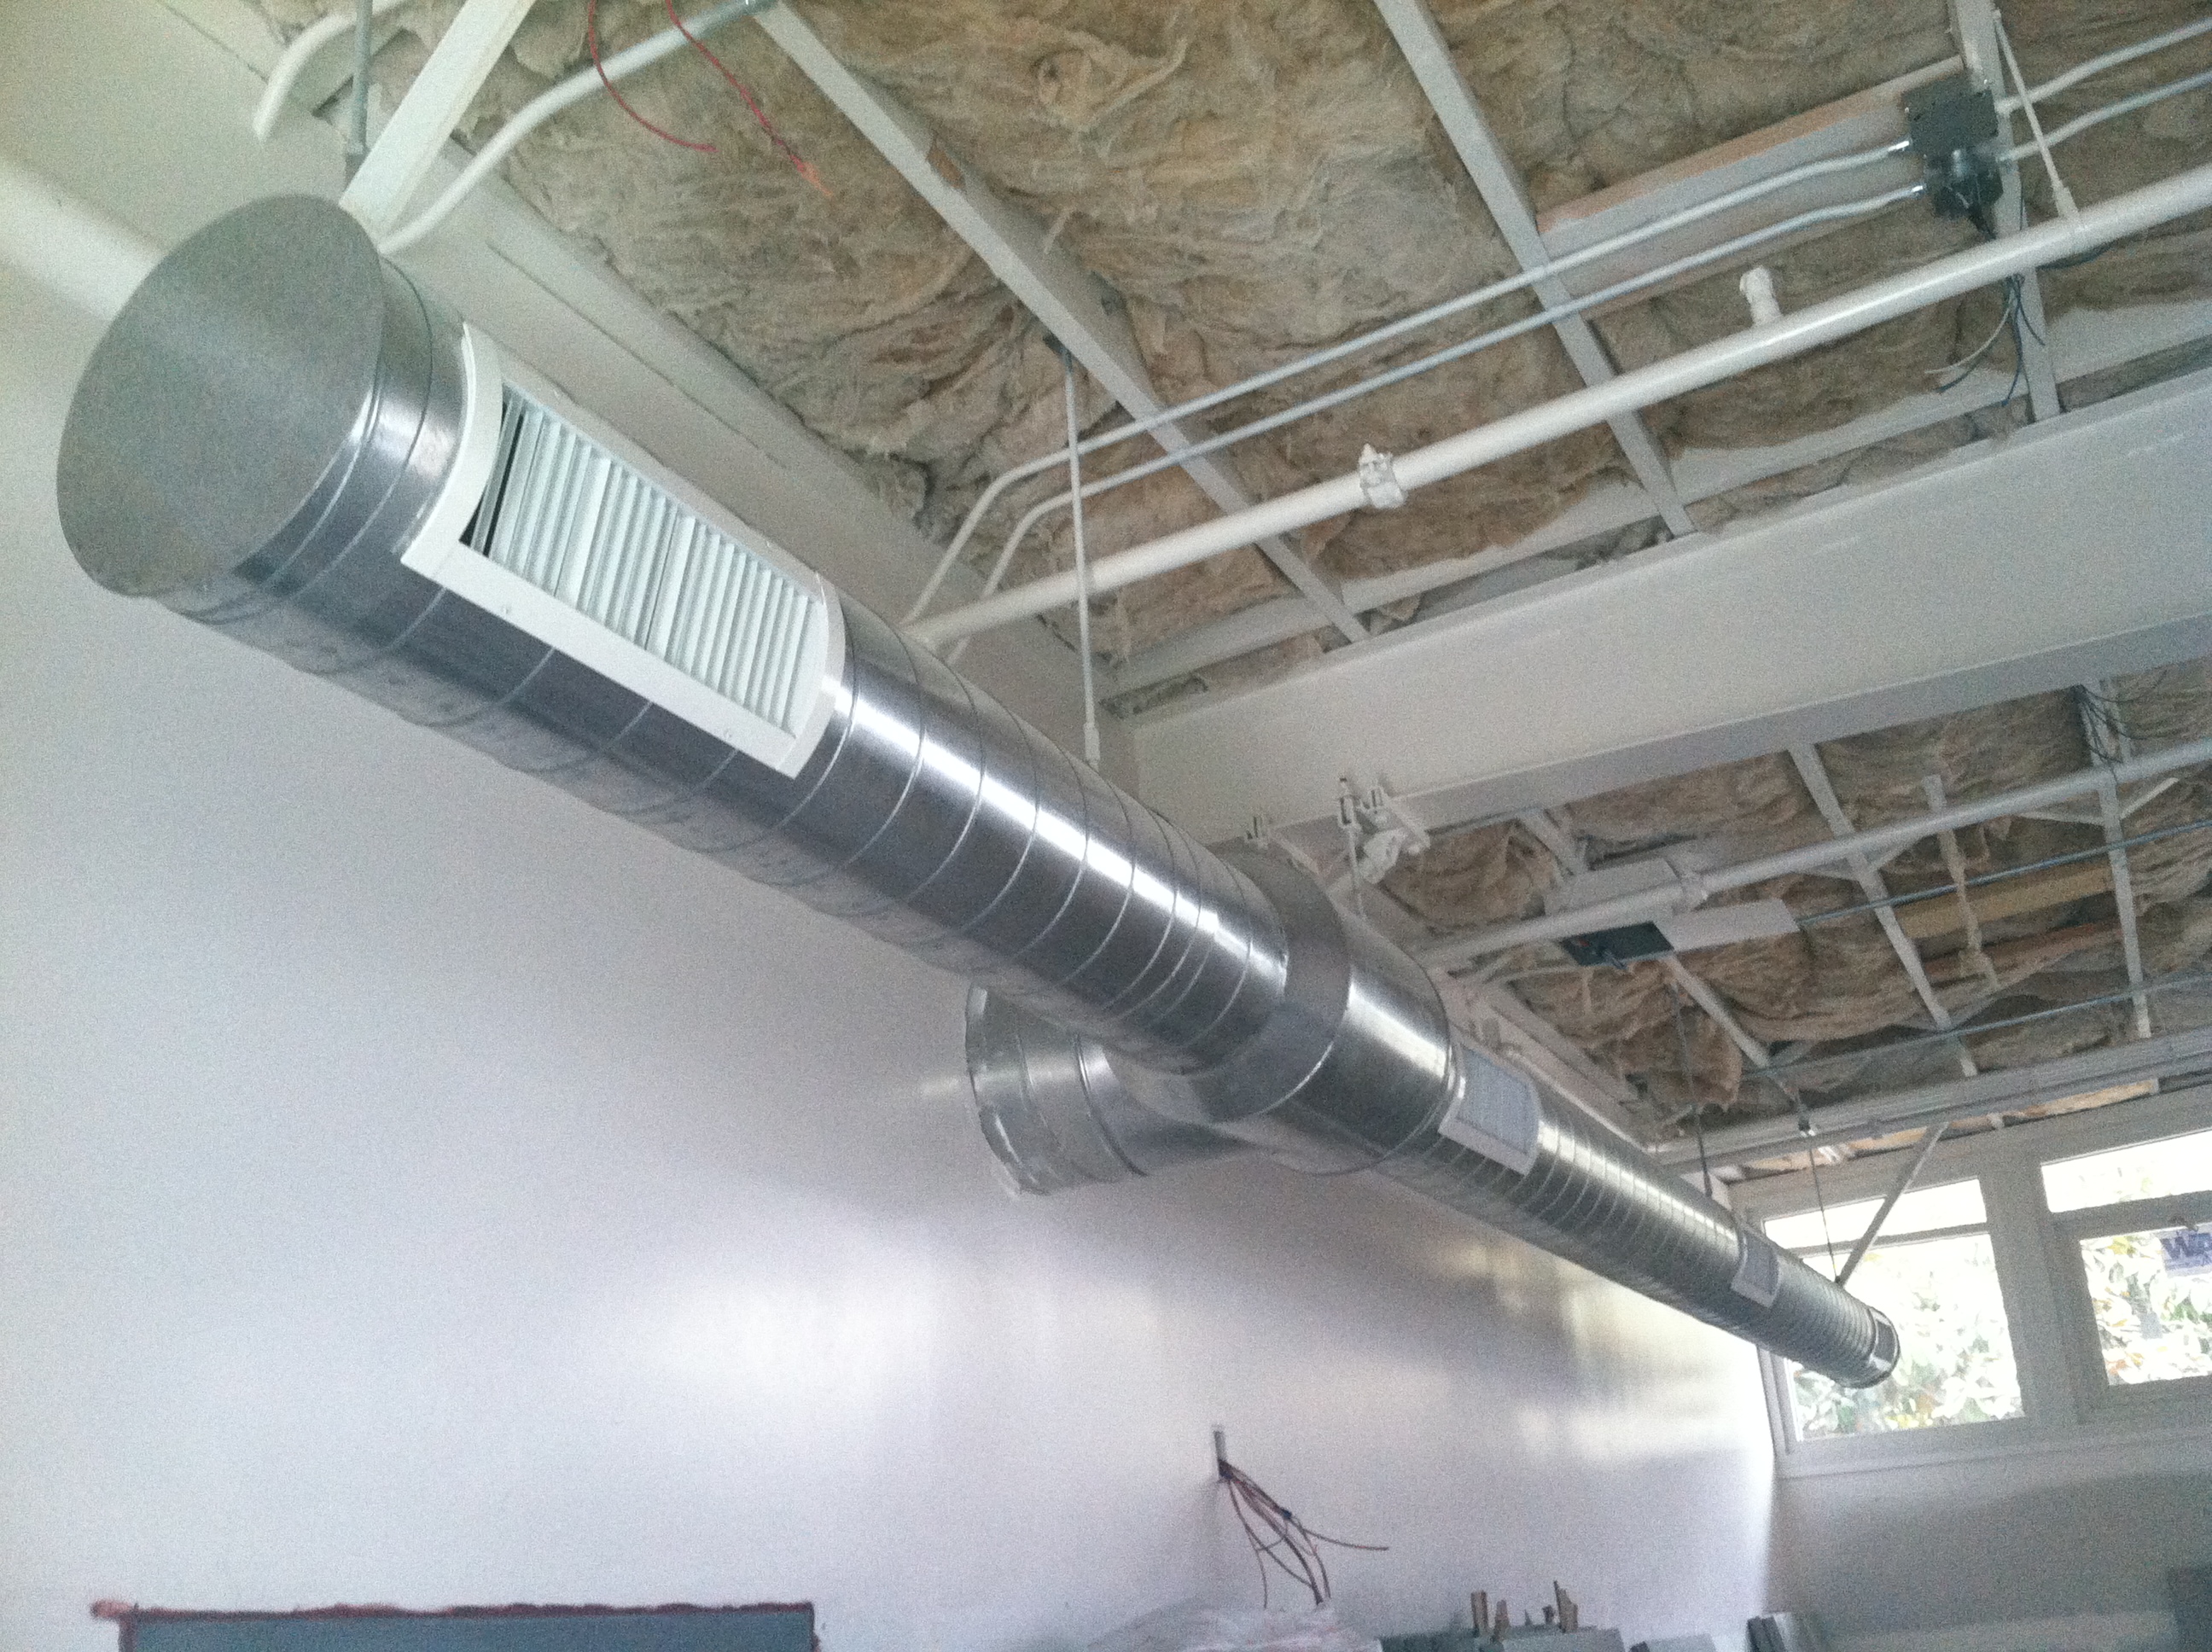 Best Of Exposed Air Conditioning Ducts - hypermallapartments